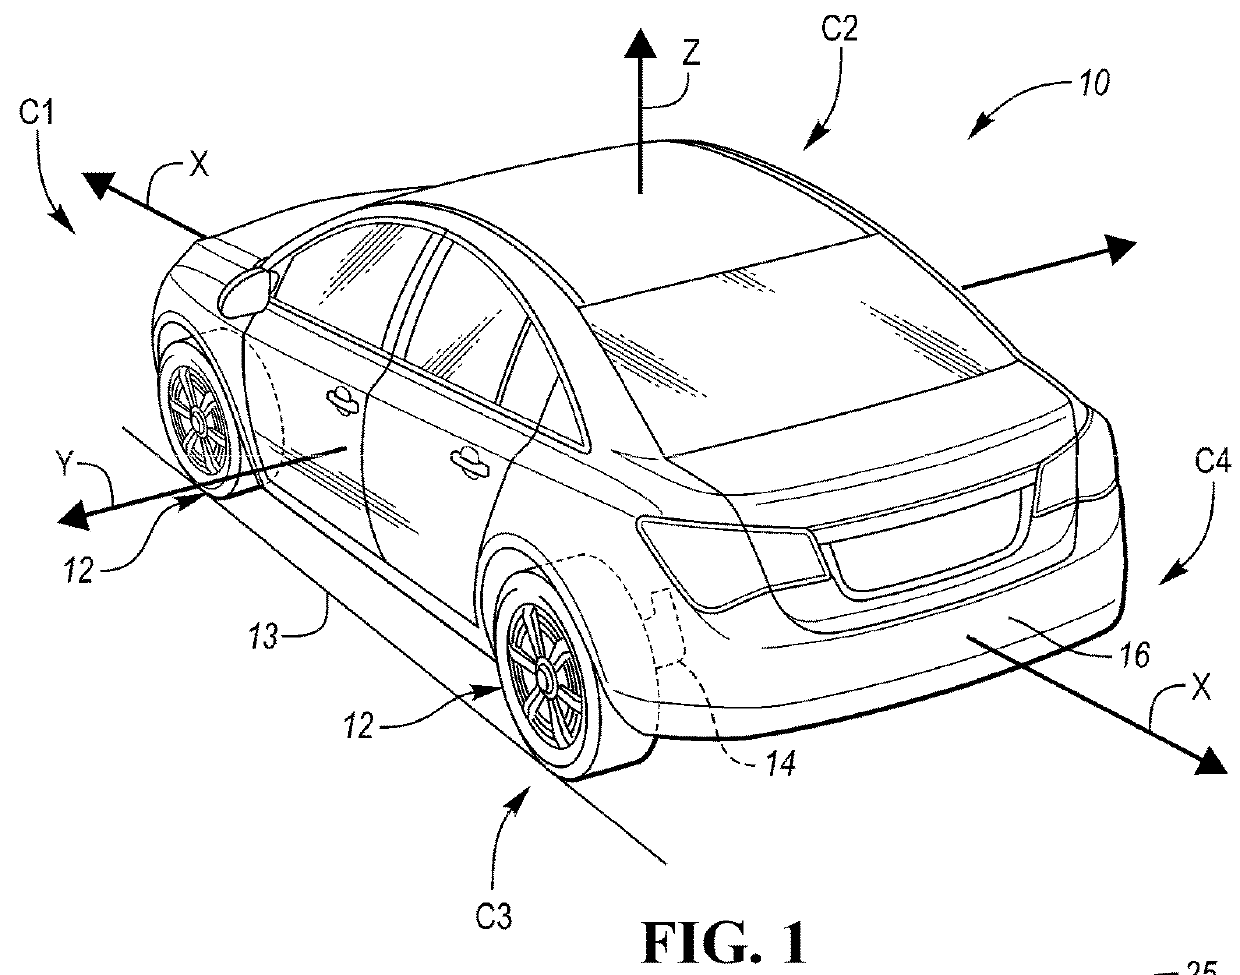 Vehicle with suspension force decoupling system